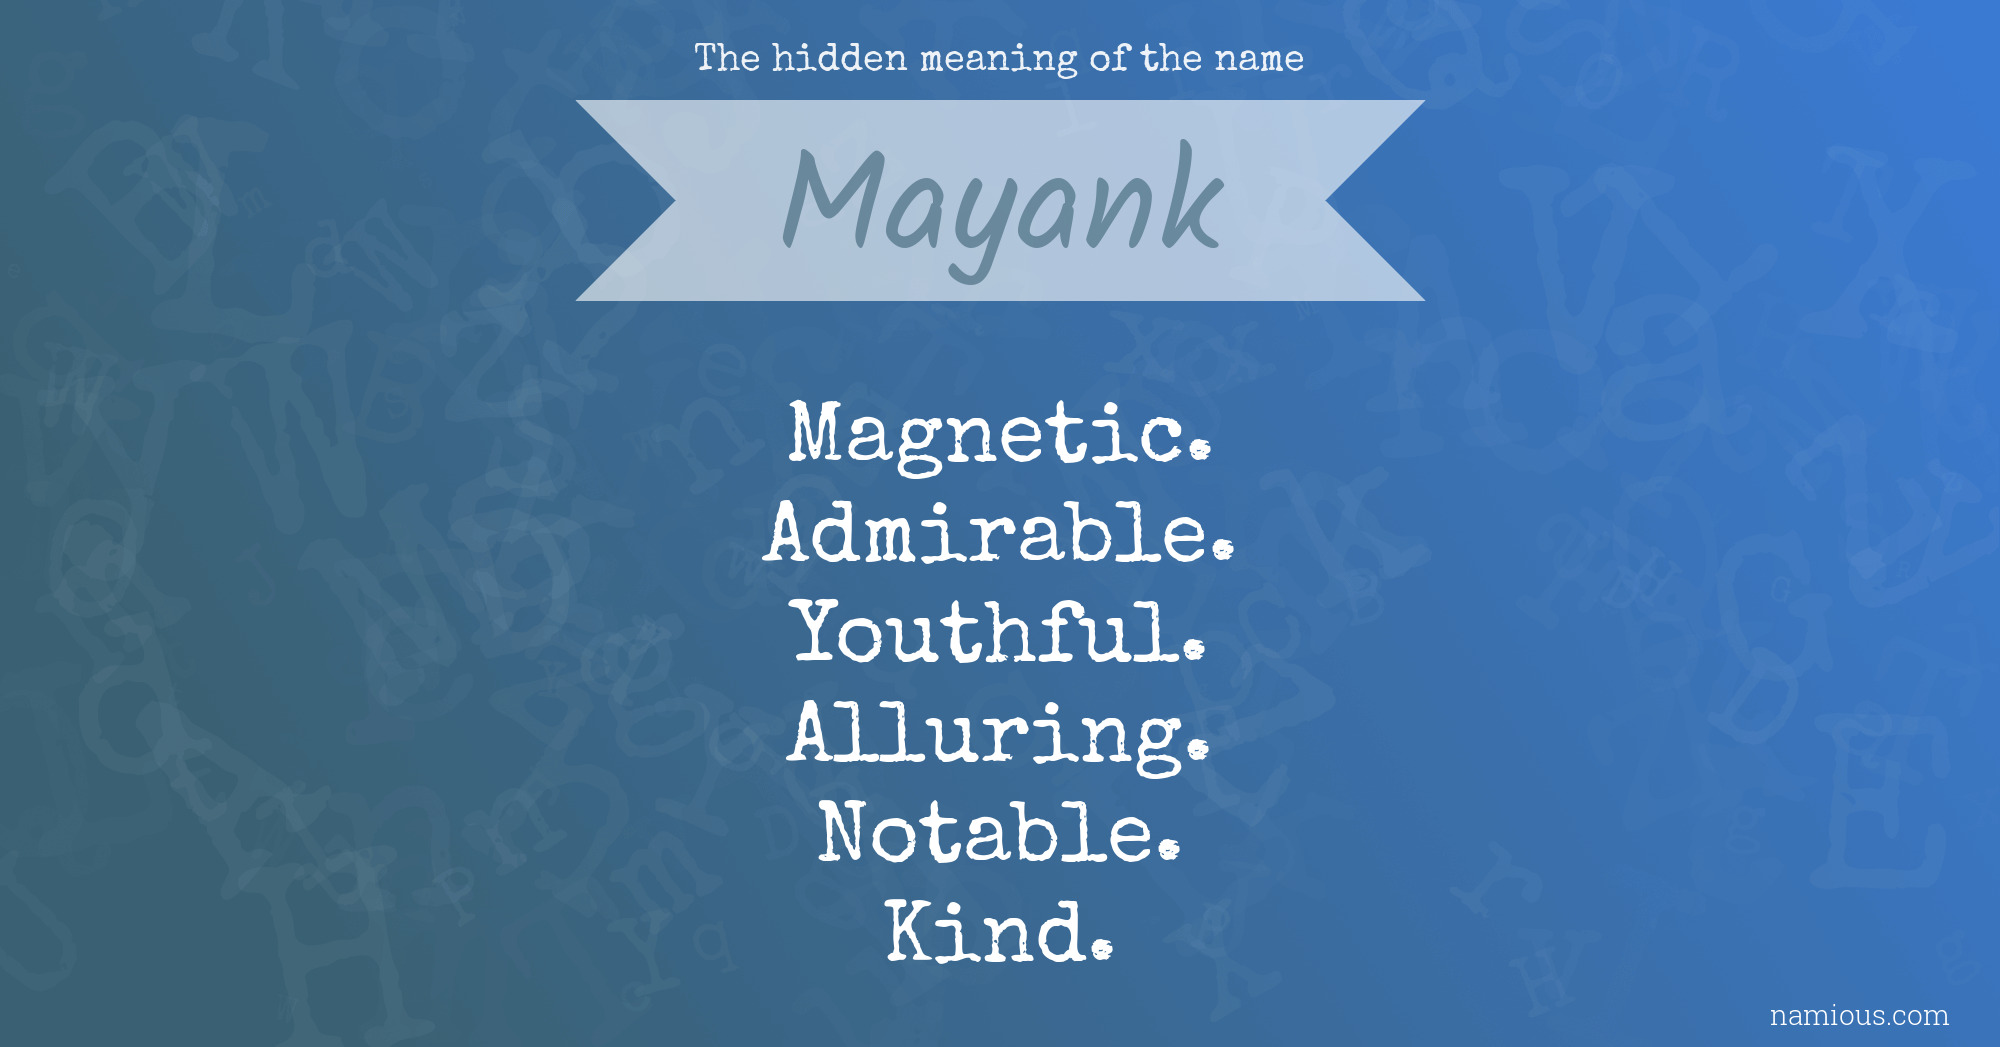 The hidden meaning of the name Mayank